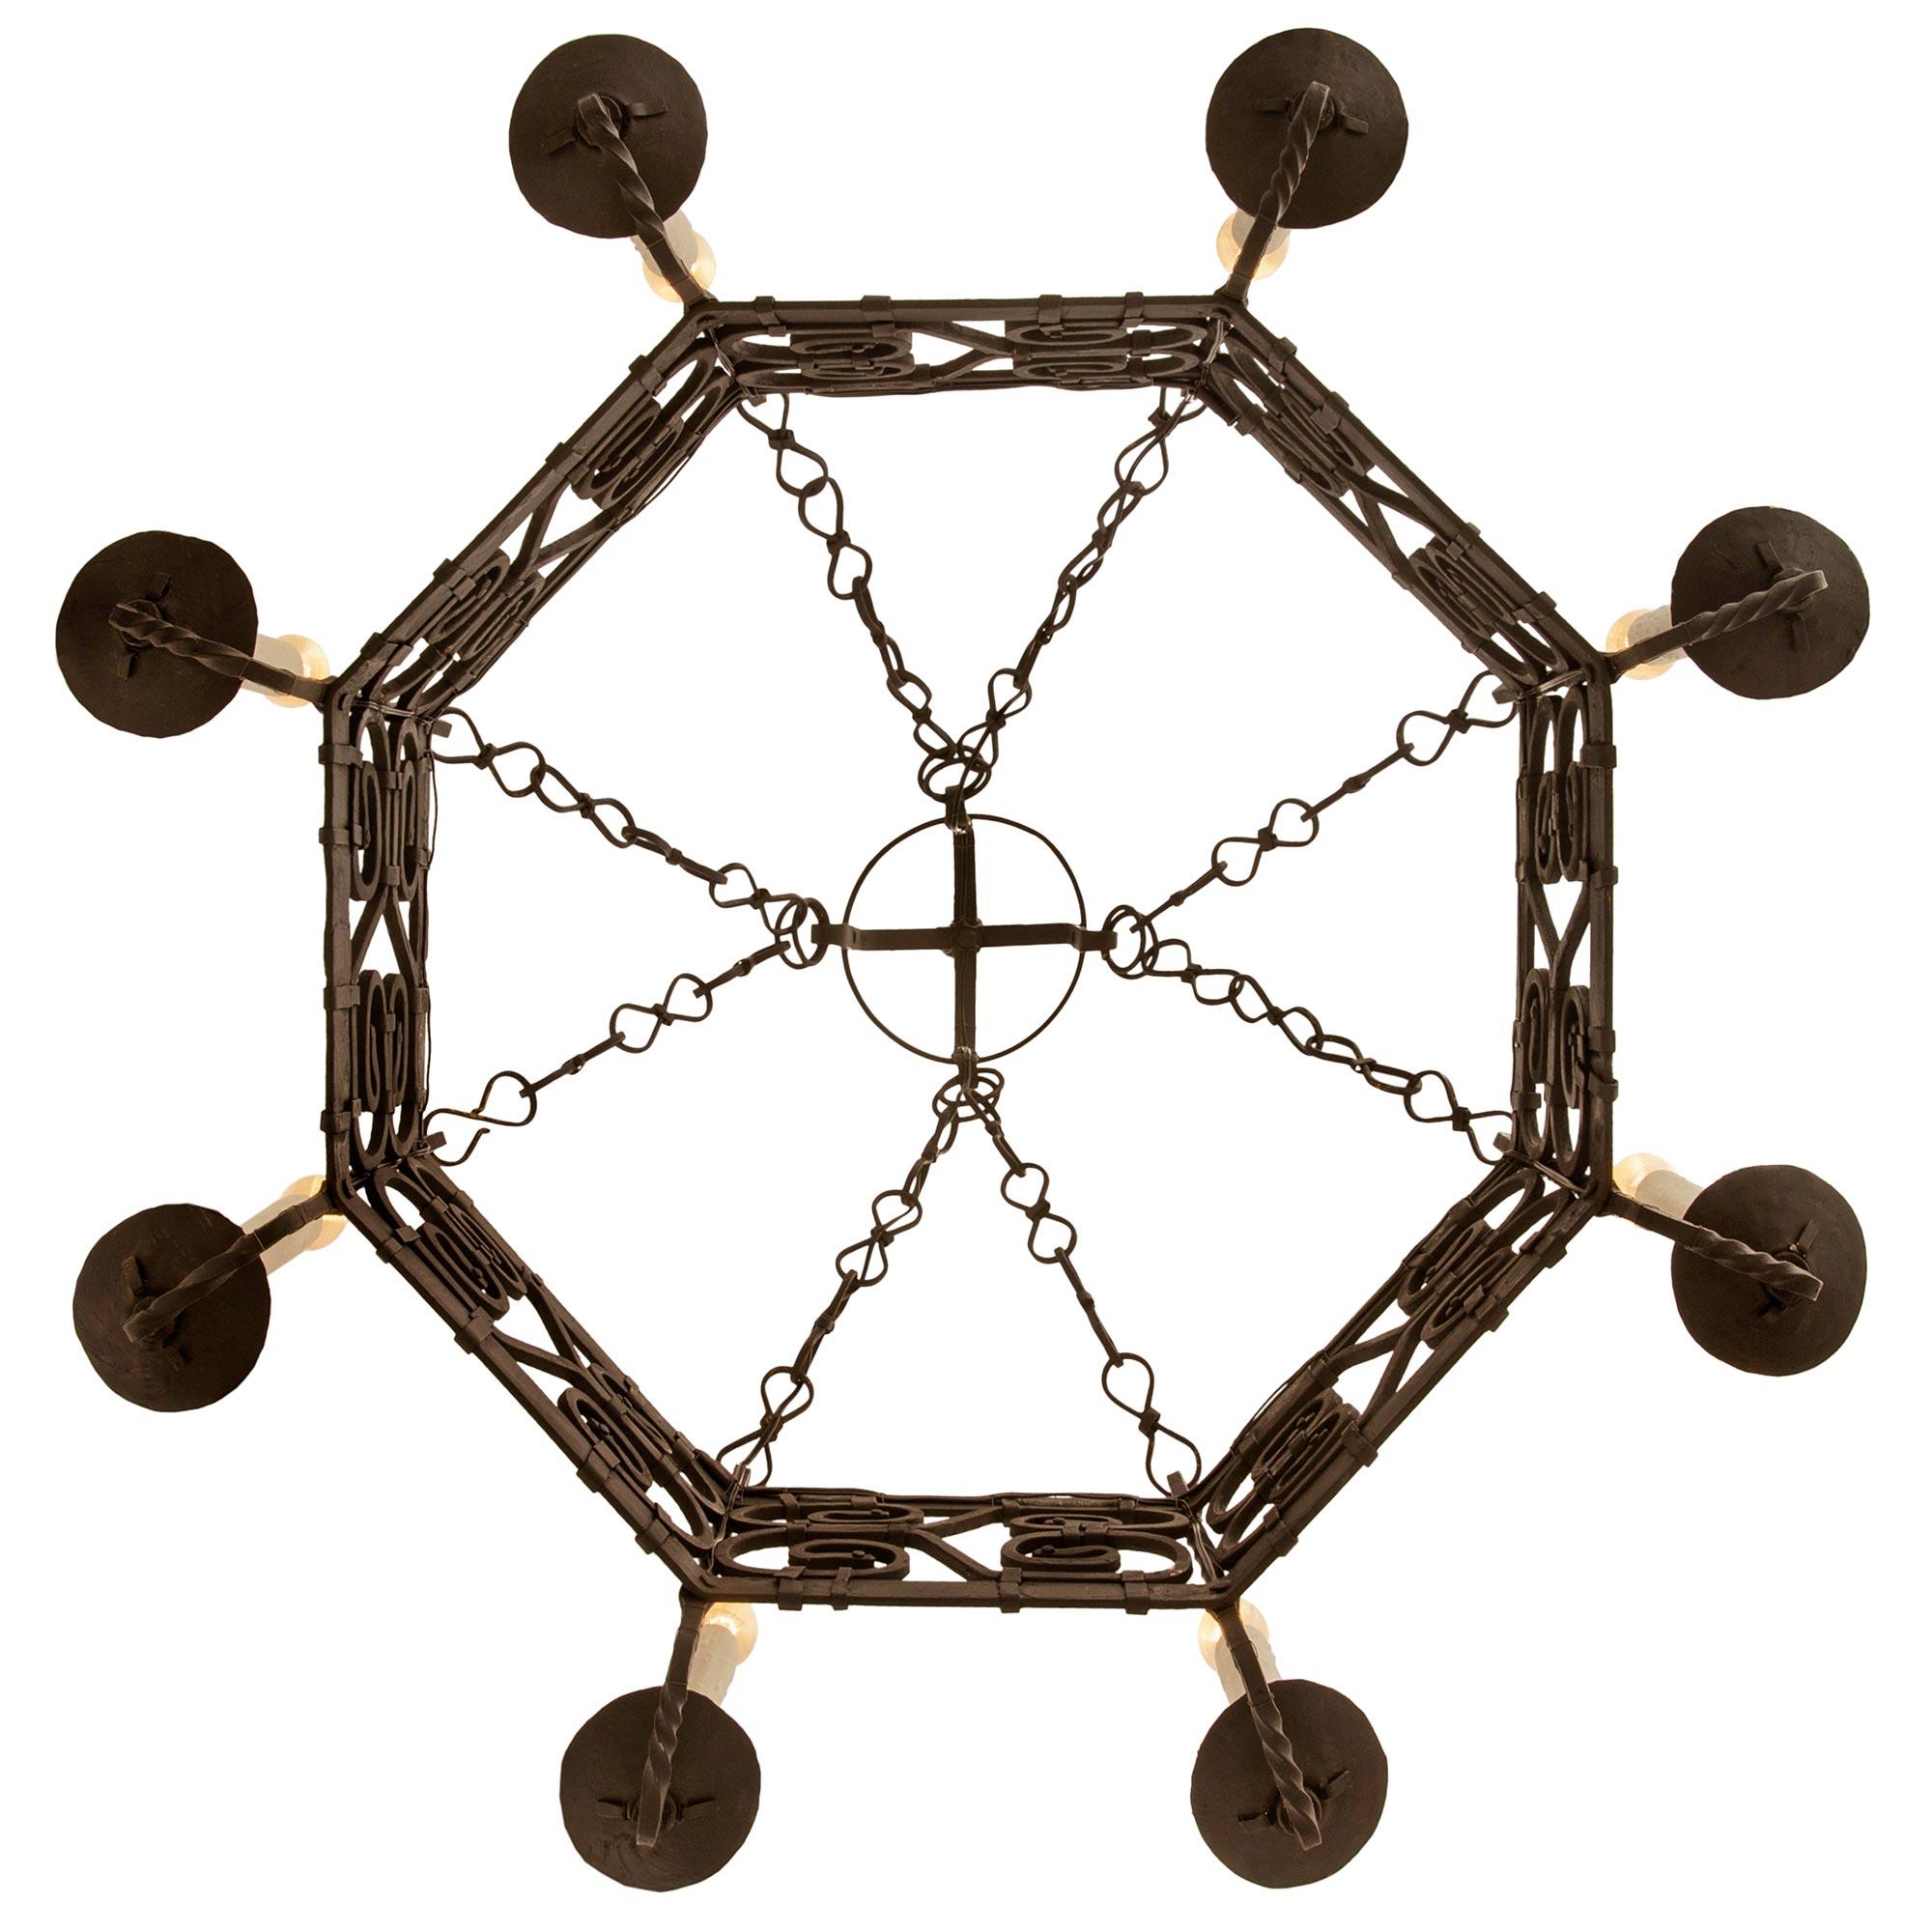 A handsome French Turn of the Century Renaissance st. Wrought Iron chandelier. The eight arm octagonal chandelier consist of a most impressive and detailed mid section displaying wonderful banded scrolls with rosettes and twisted iron bars.